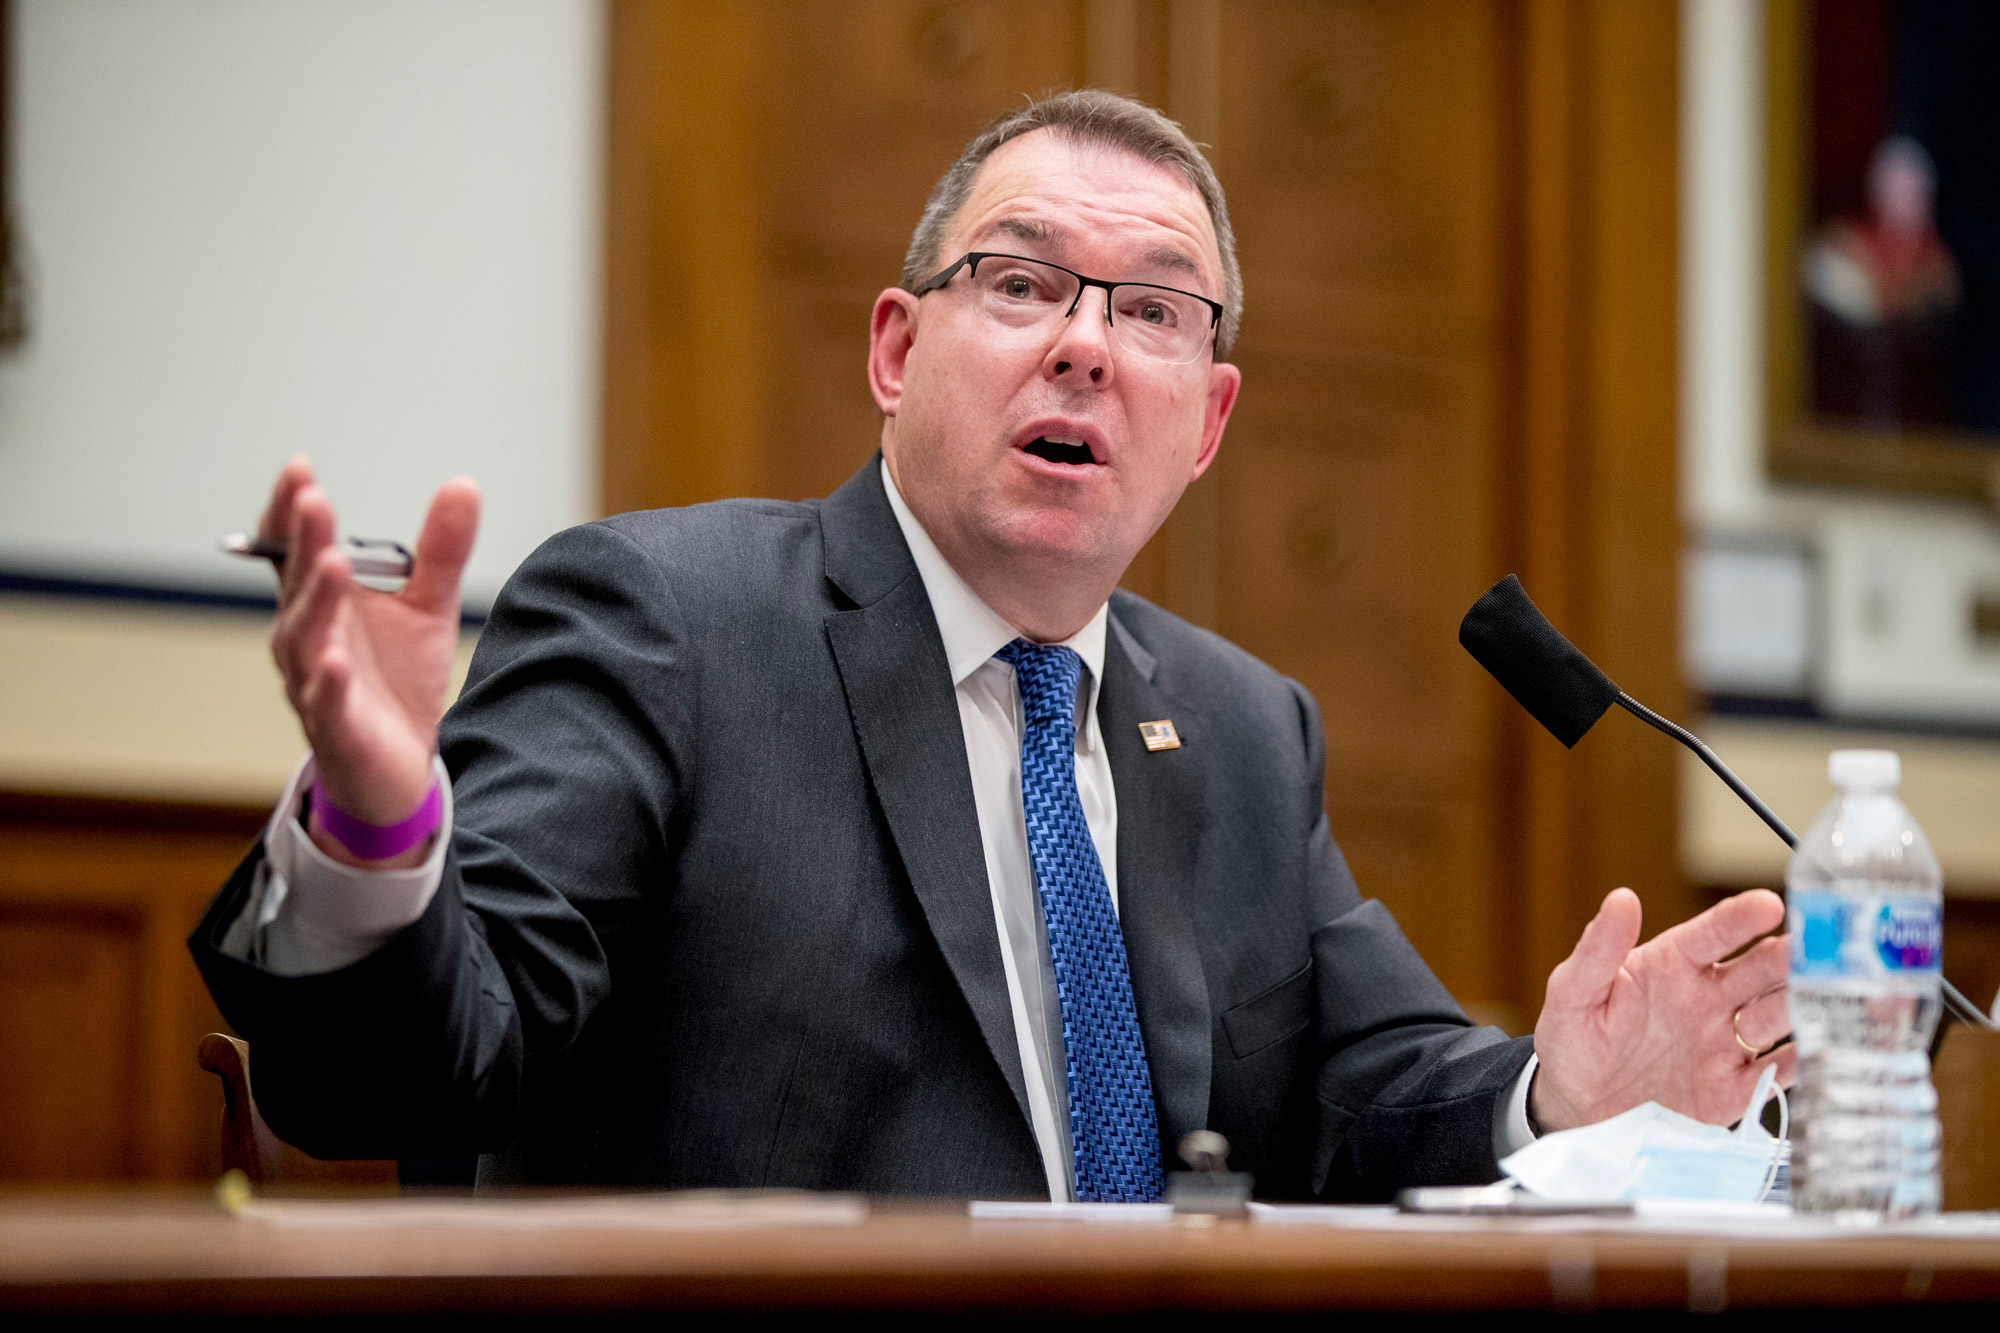 Federal Emergency Management Agency Administrator Peter Gaynor testifies before a House Committee on Homeland Security meeting on Capitol Hill in Washington, DC, on July 22 on the national response to the coronavirus pandemic. 